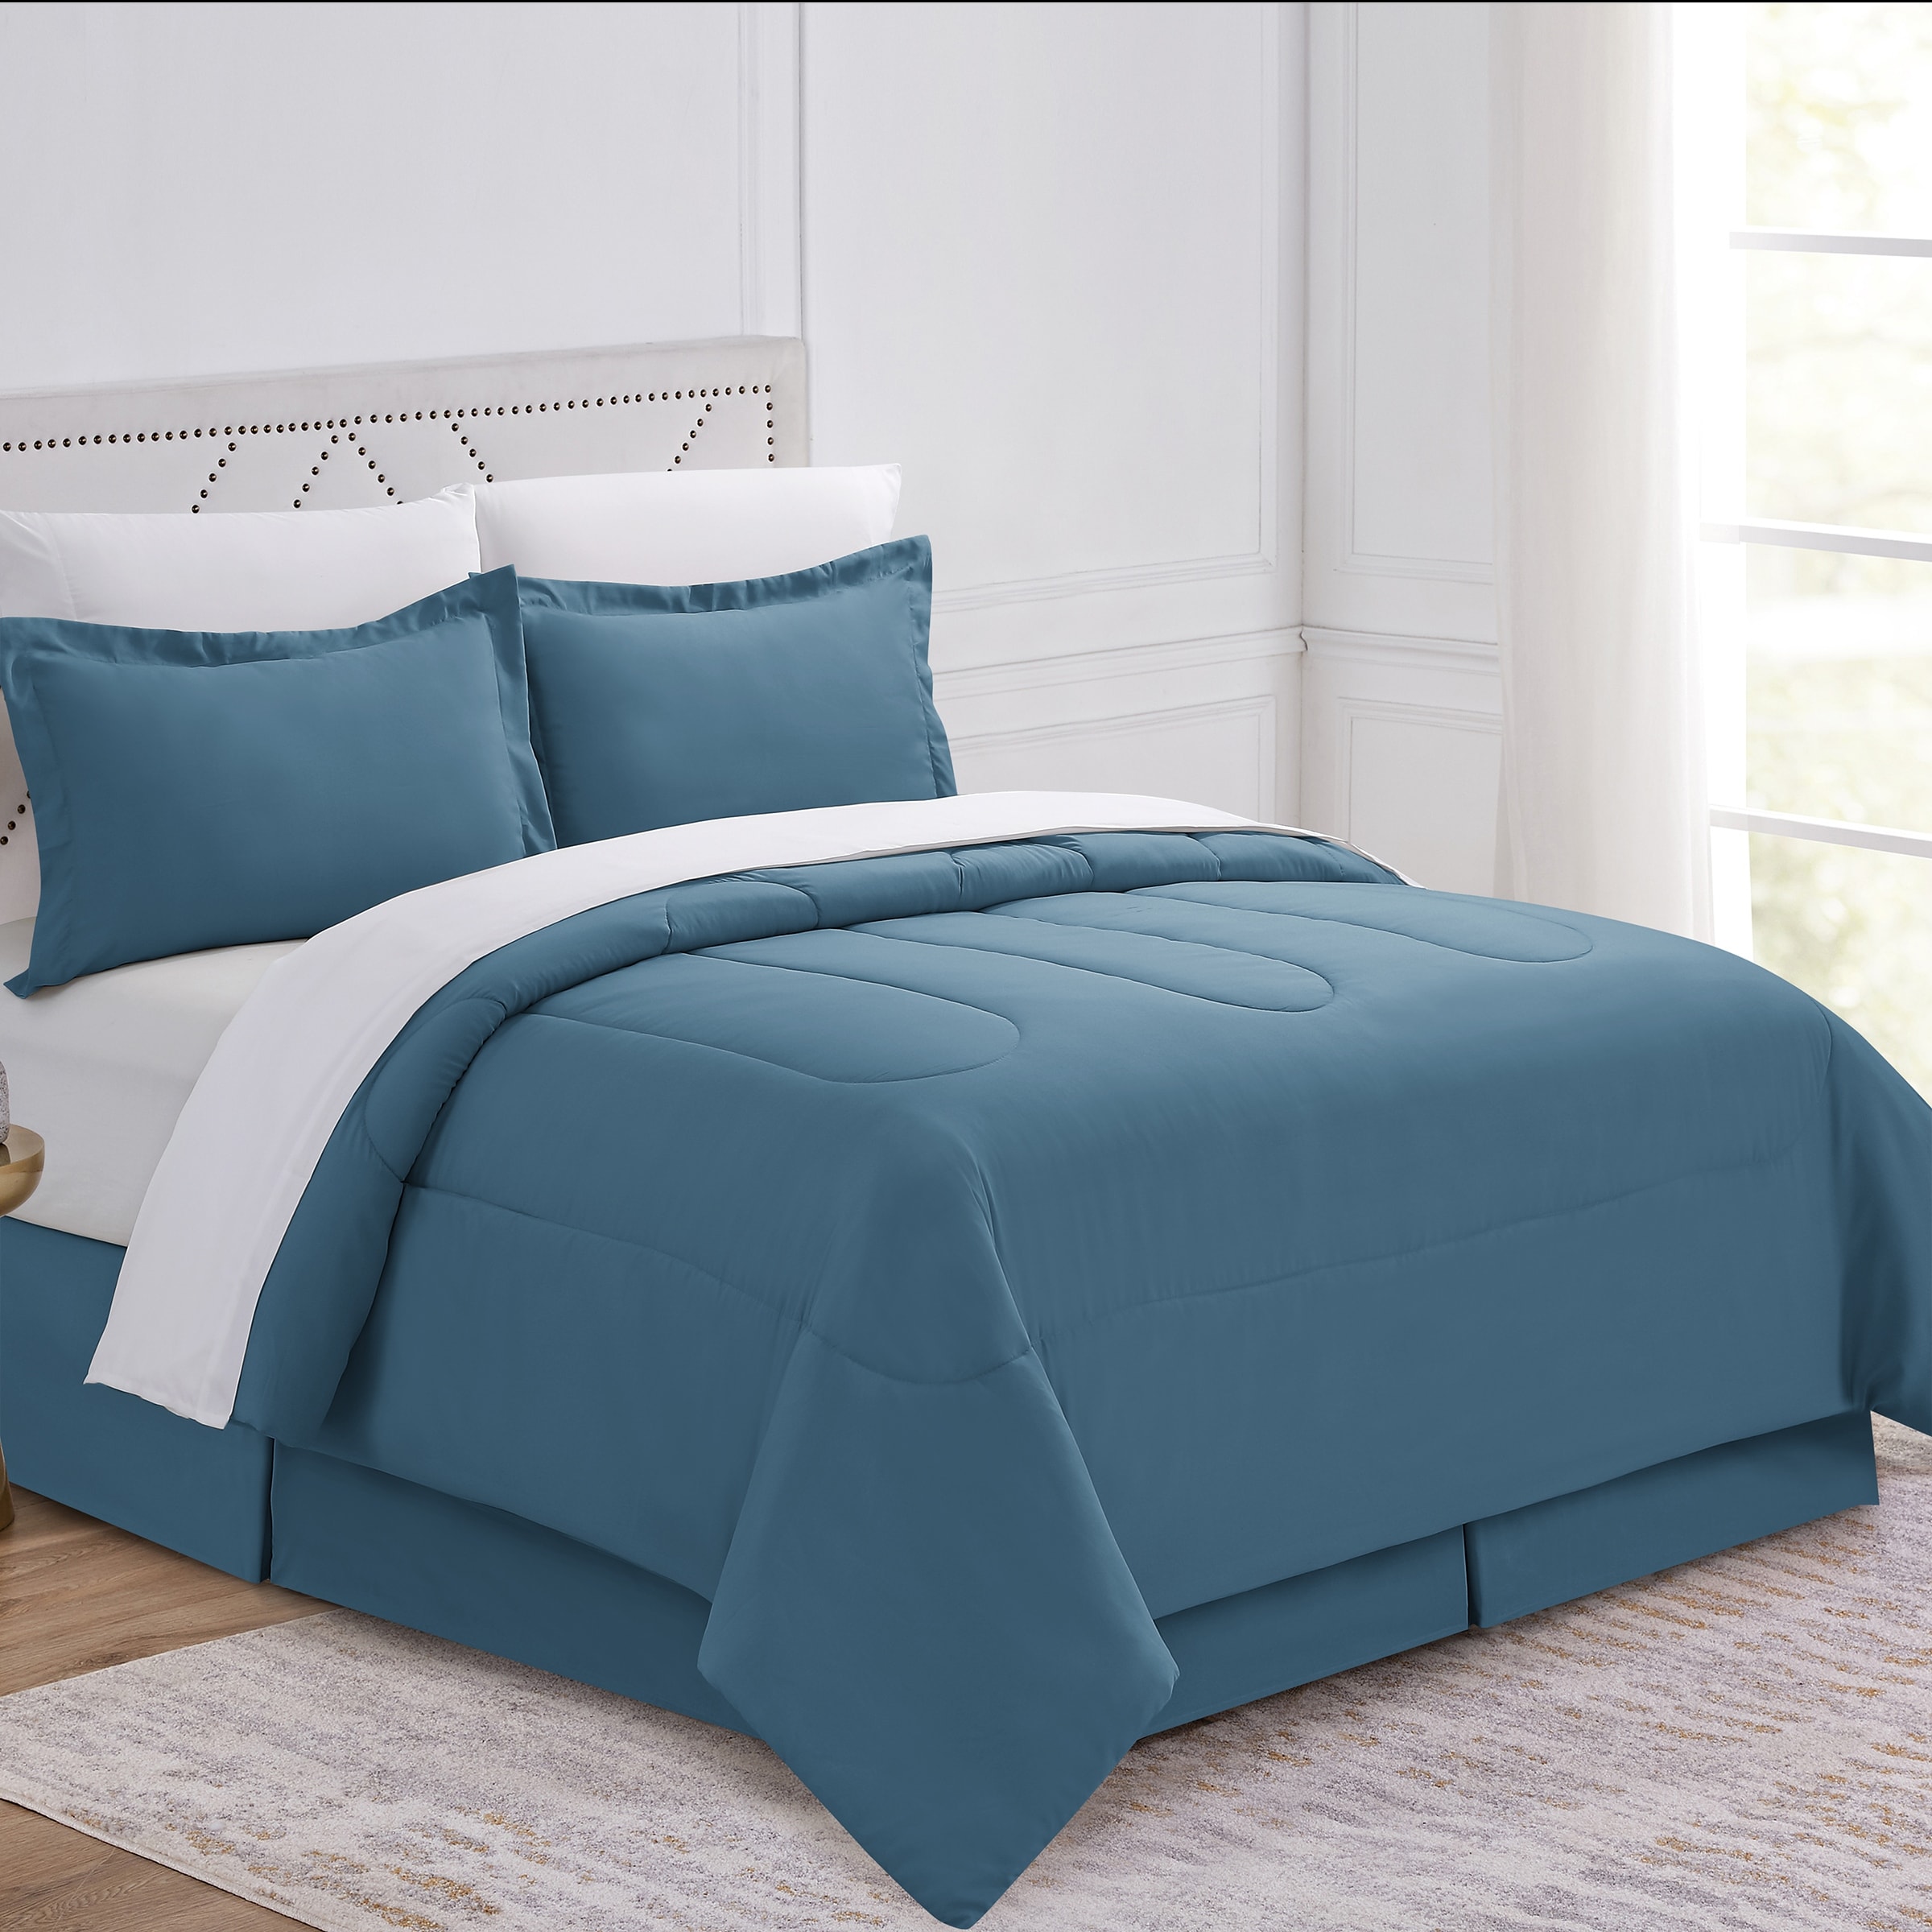 https://ak1.ostkcdn.com/images/products/is/images/direct/964d87bcc14e3b00ef6f3bc676ece88aa9d33cfe/Swift-Home-Ultra-Soft-All-Season-Bed-in-a-Bag-Set.jpg